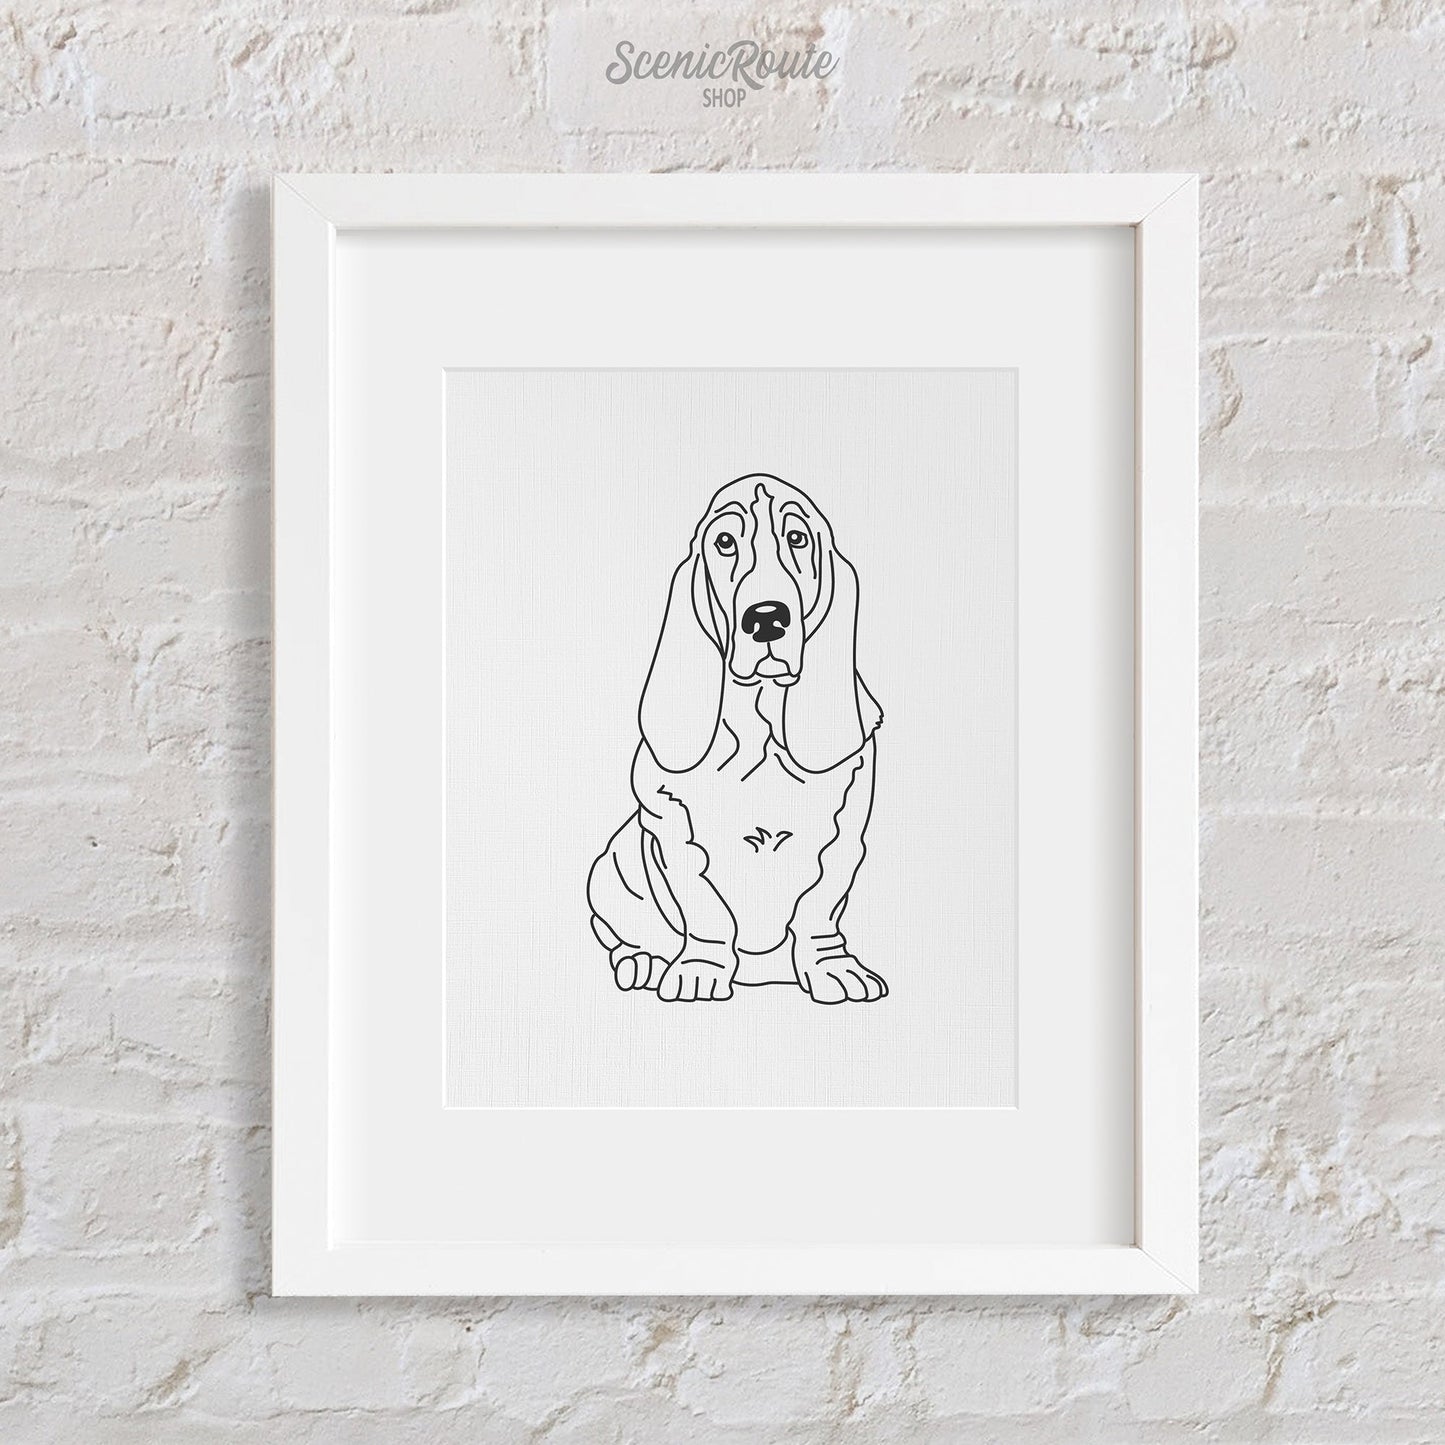 A framed line art drawing of a Basset Hound dog on a white brick wall